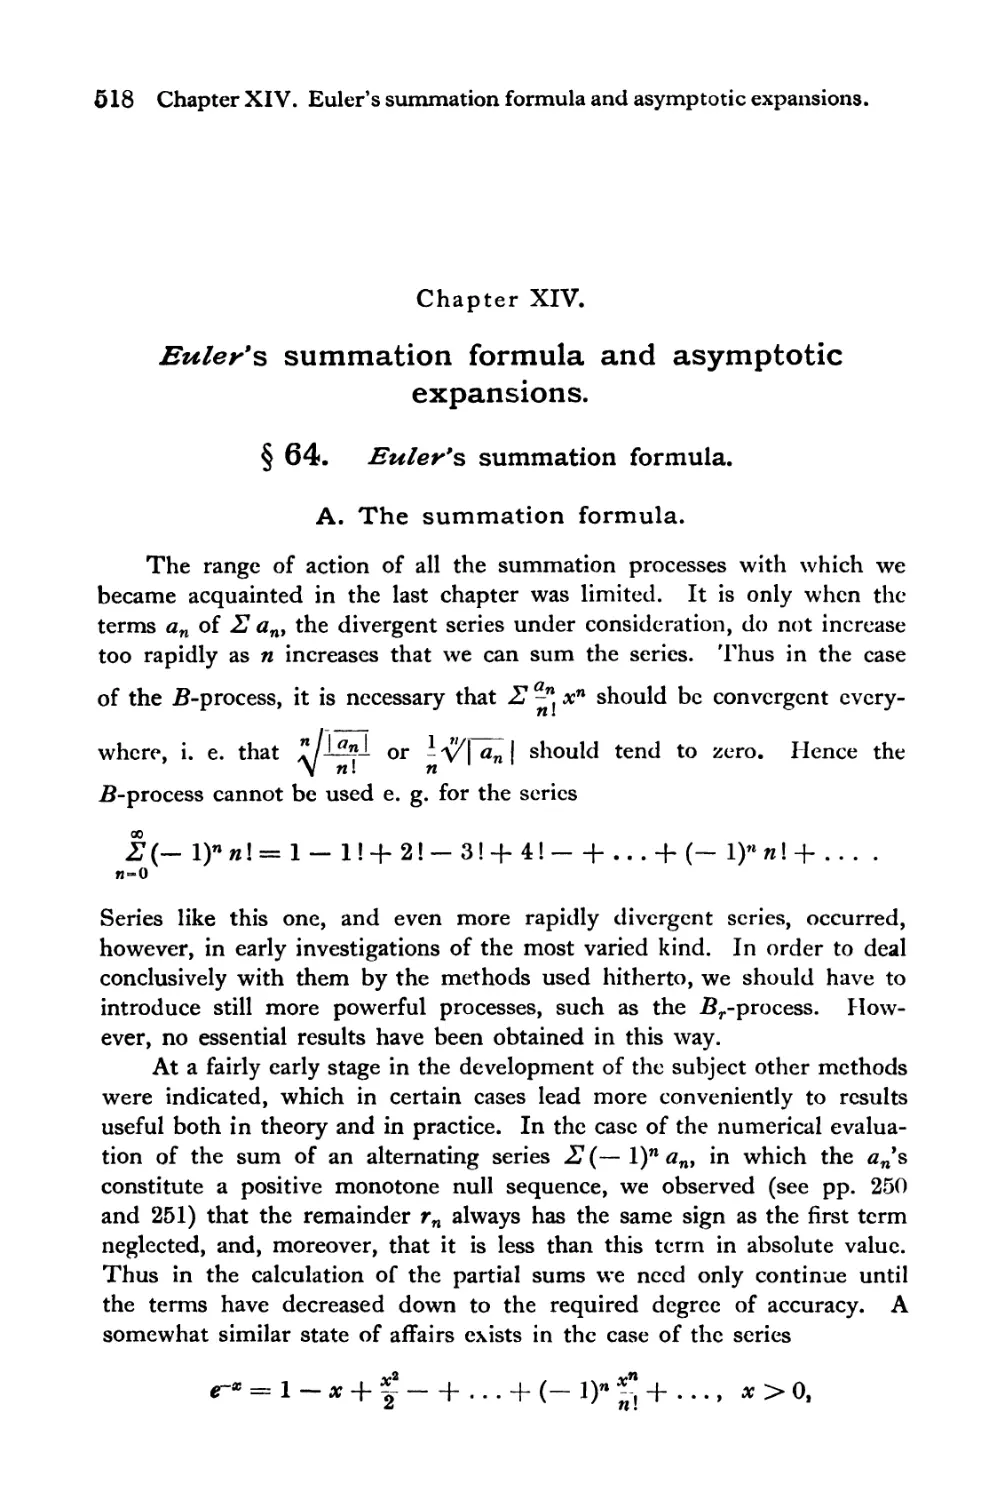 Chapter XIV. Euler's summation formula and asymptotic expansions